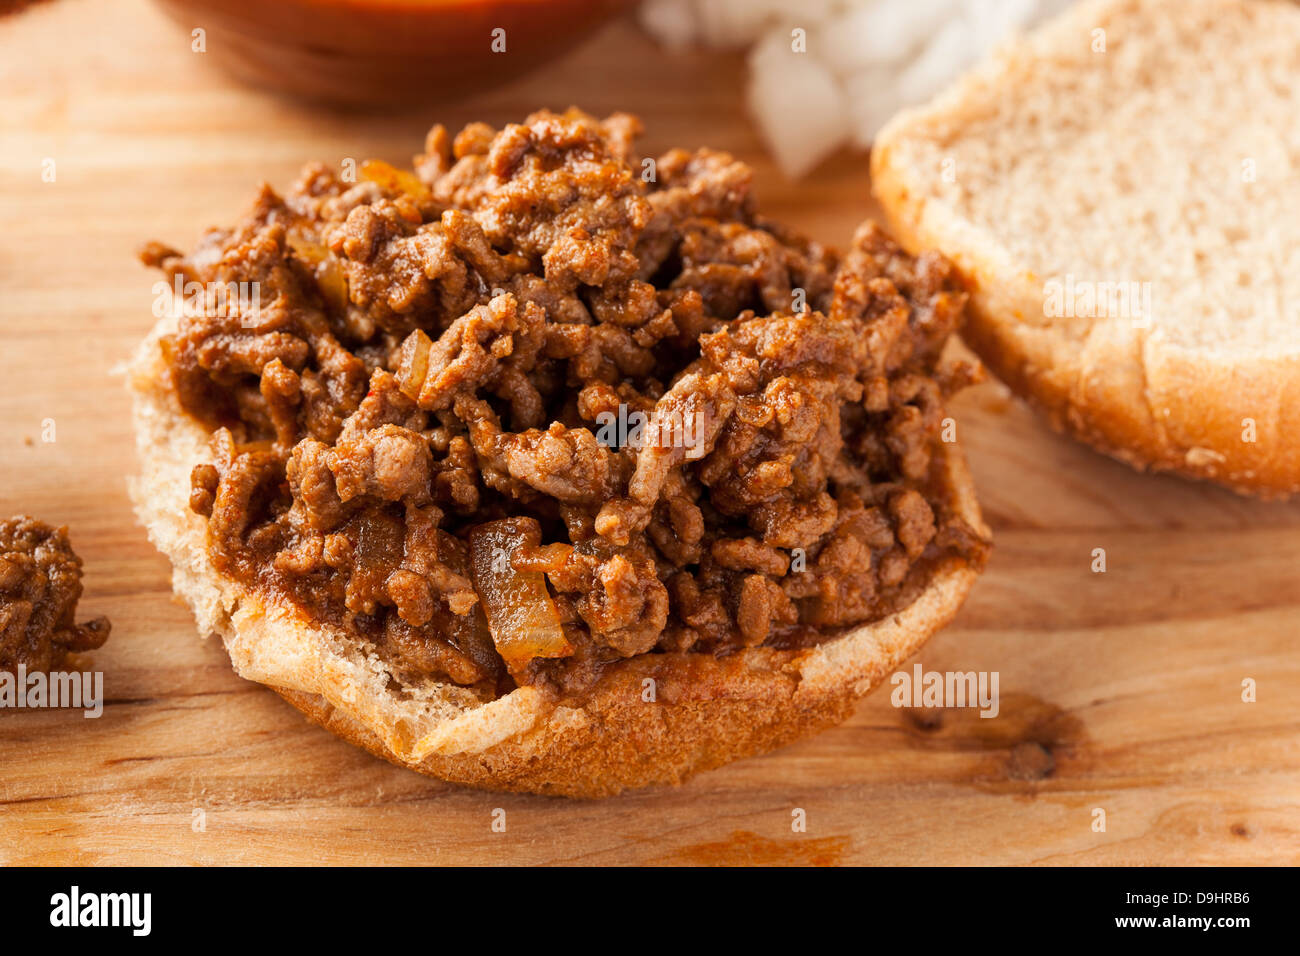 Sloppy Barbecue Beef Sandwich on a whole wheat bun Stock Photo